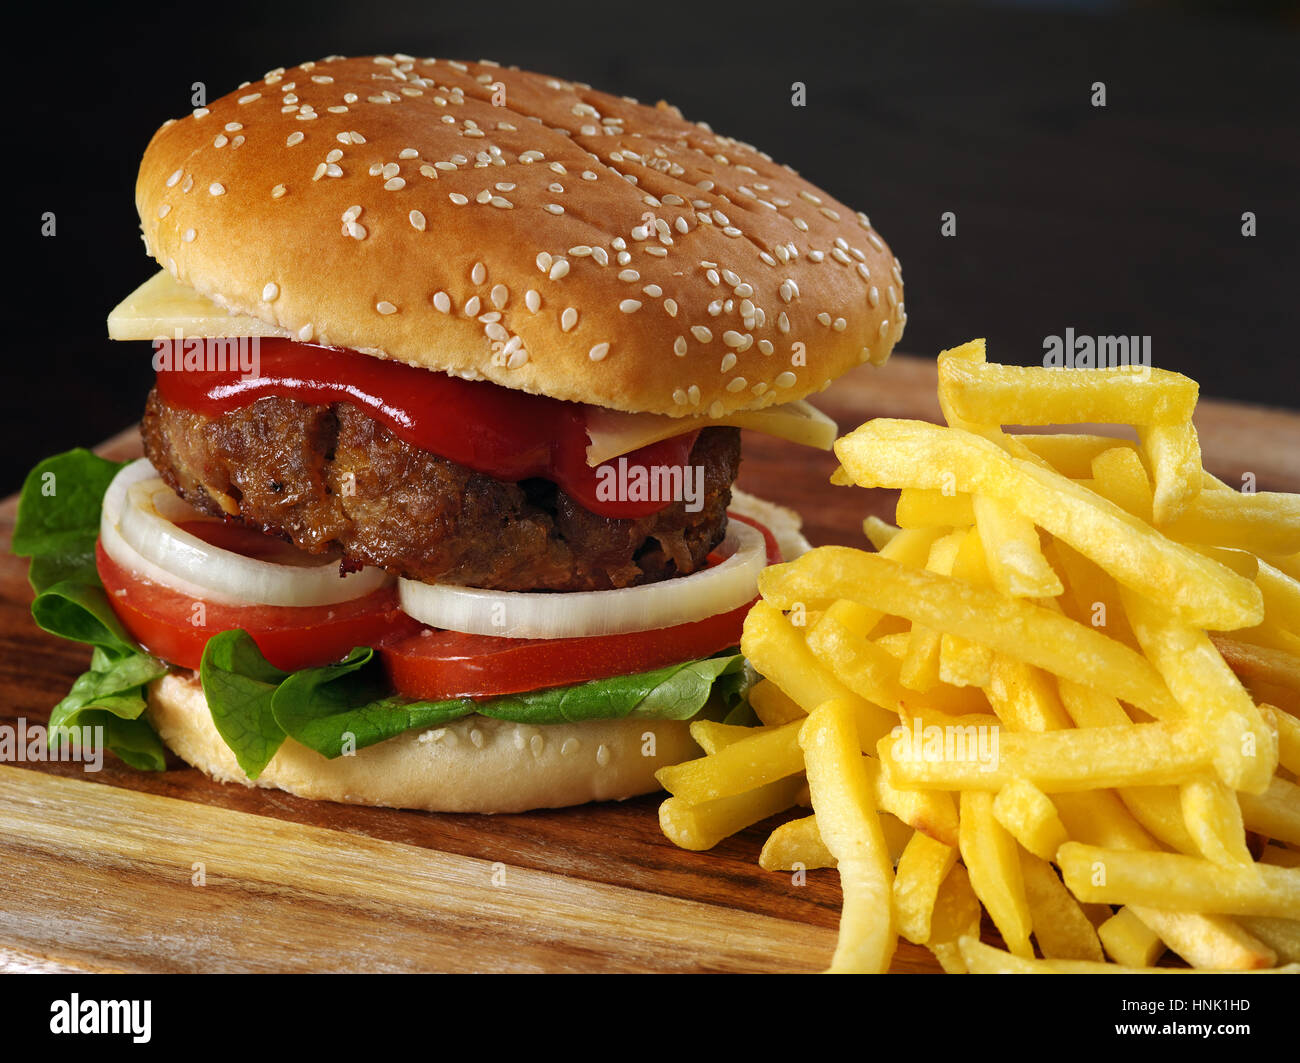 Photo of a hamburger and french fries on a wooden board. Stock Photo